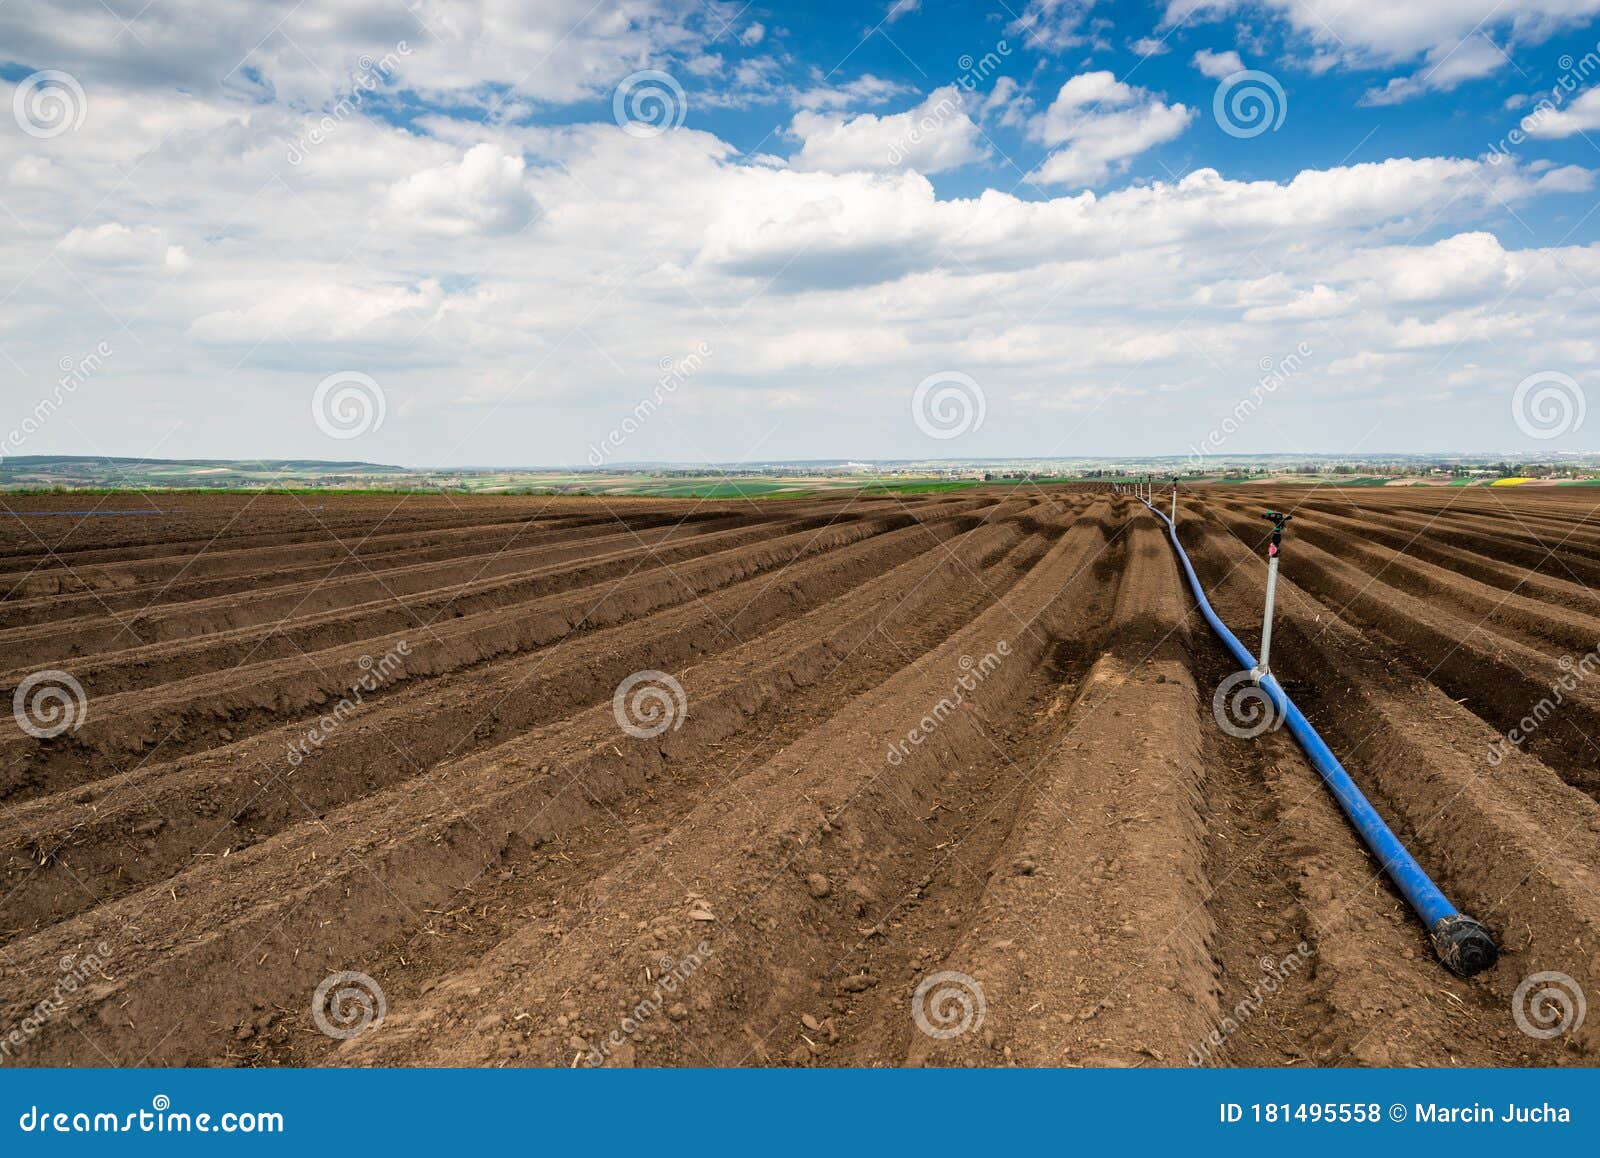 watering system in agriculture industry. drough on plantation,clima change problem